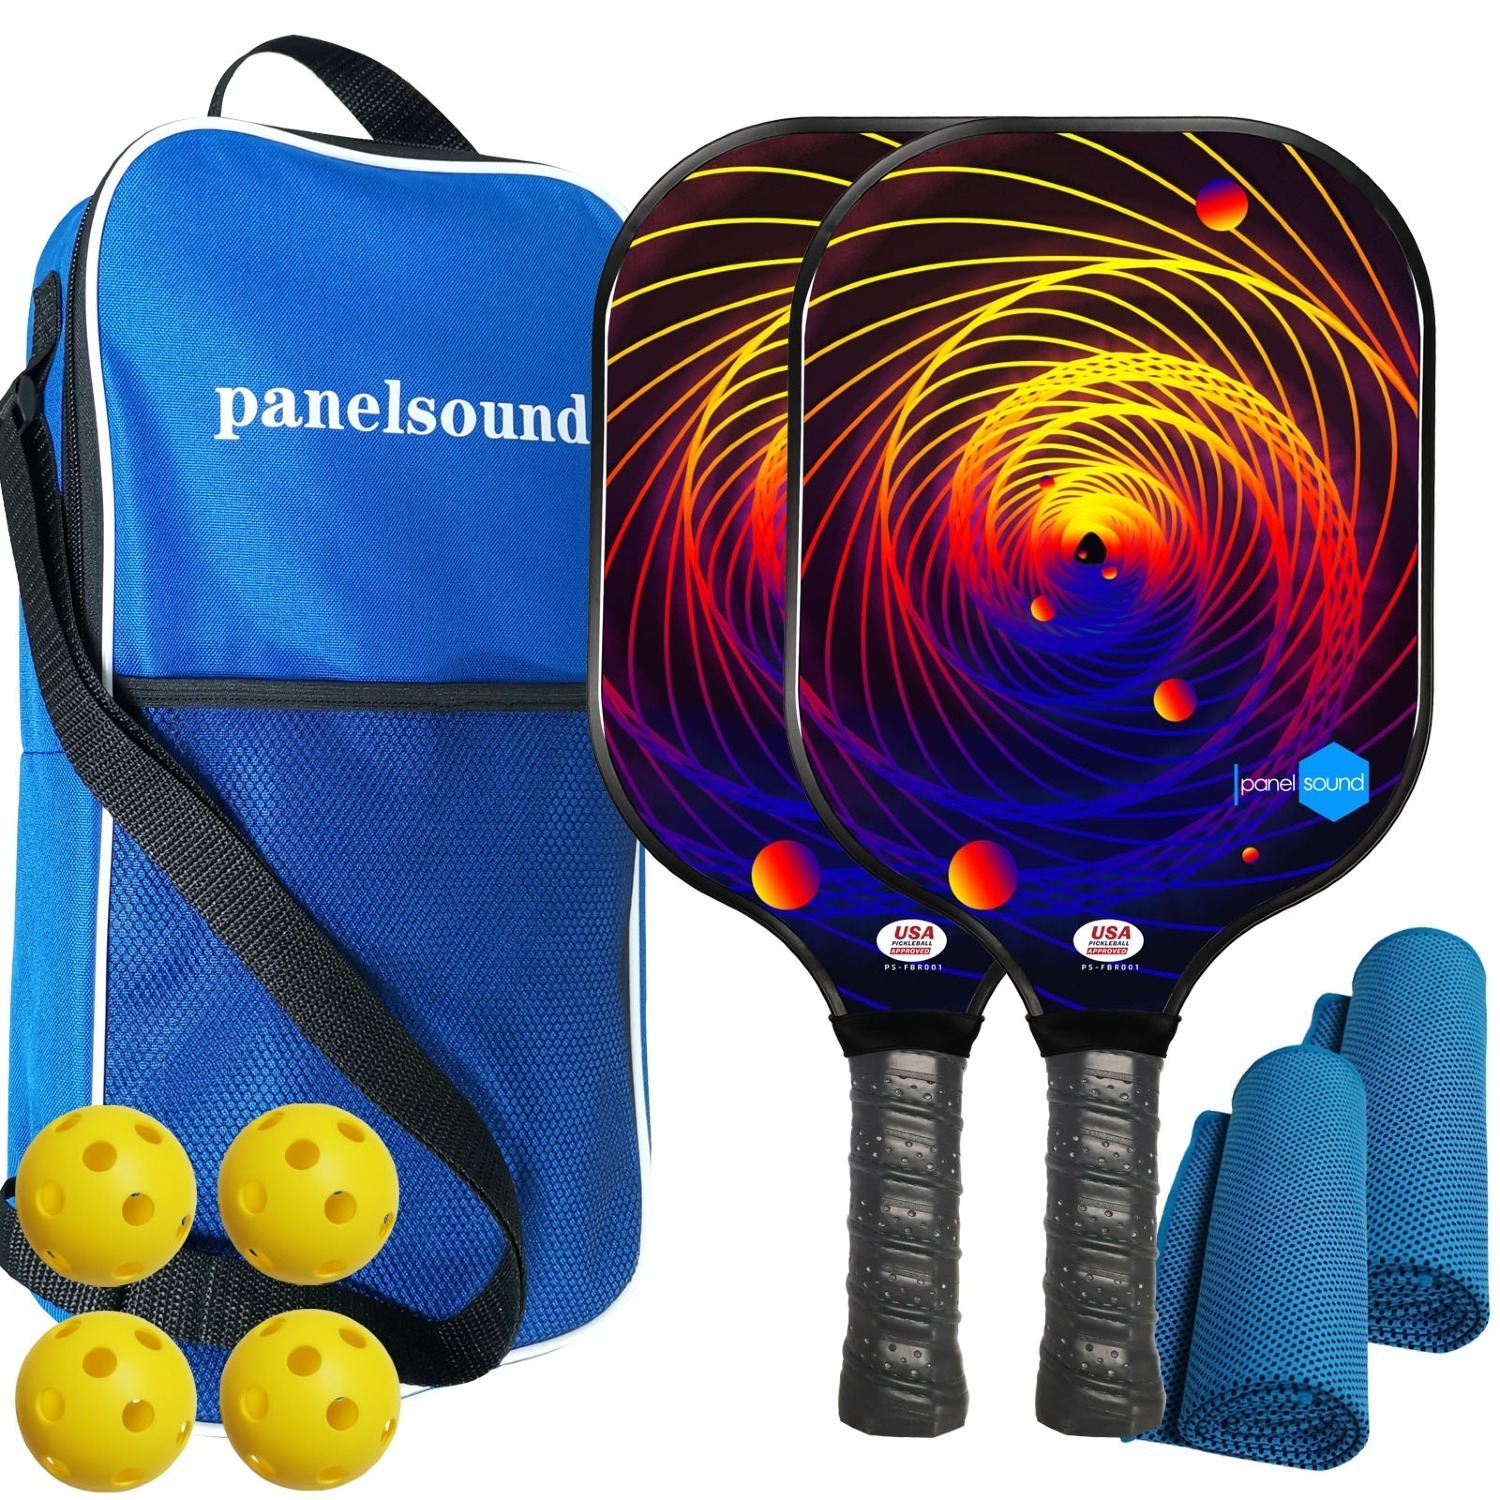 2-Ct Panel Sound Pickleball Paddles w/ 2 Cooling Towels, 4 Indoor Balls & Carrying Case $18.95 + Free Shipping w/ Prime or $35+